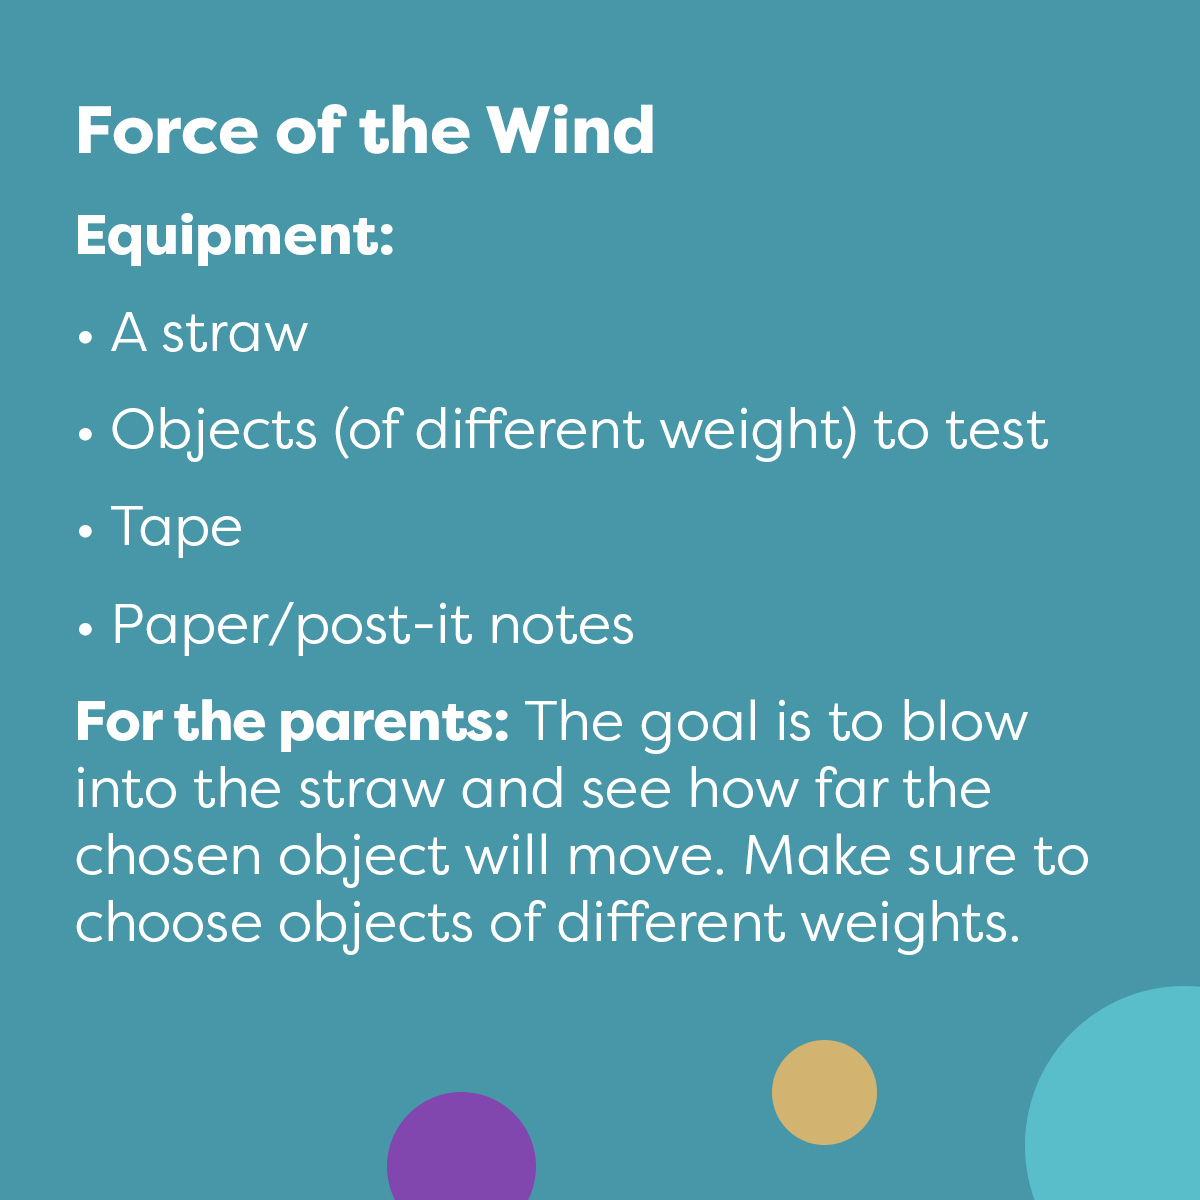 Force of the Wind Card 2